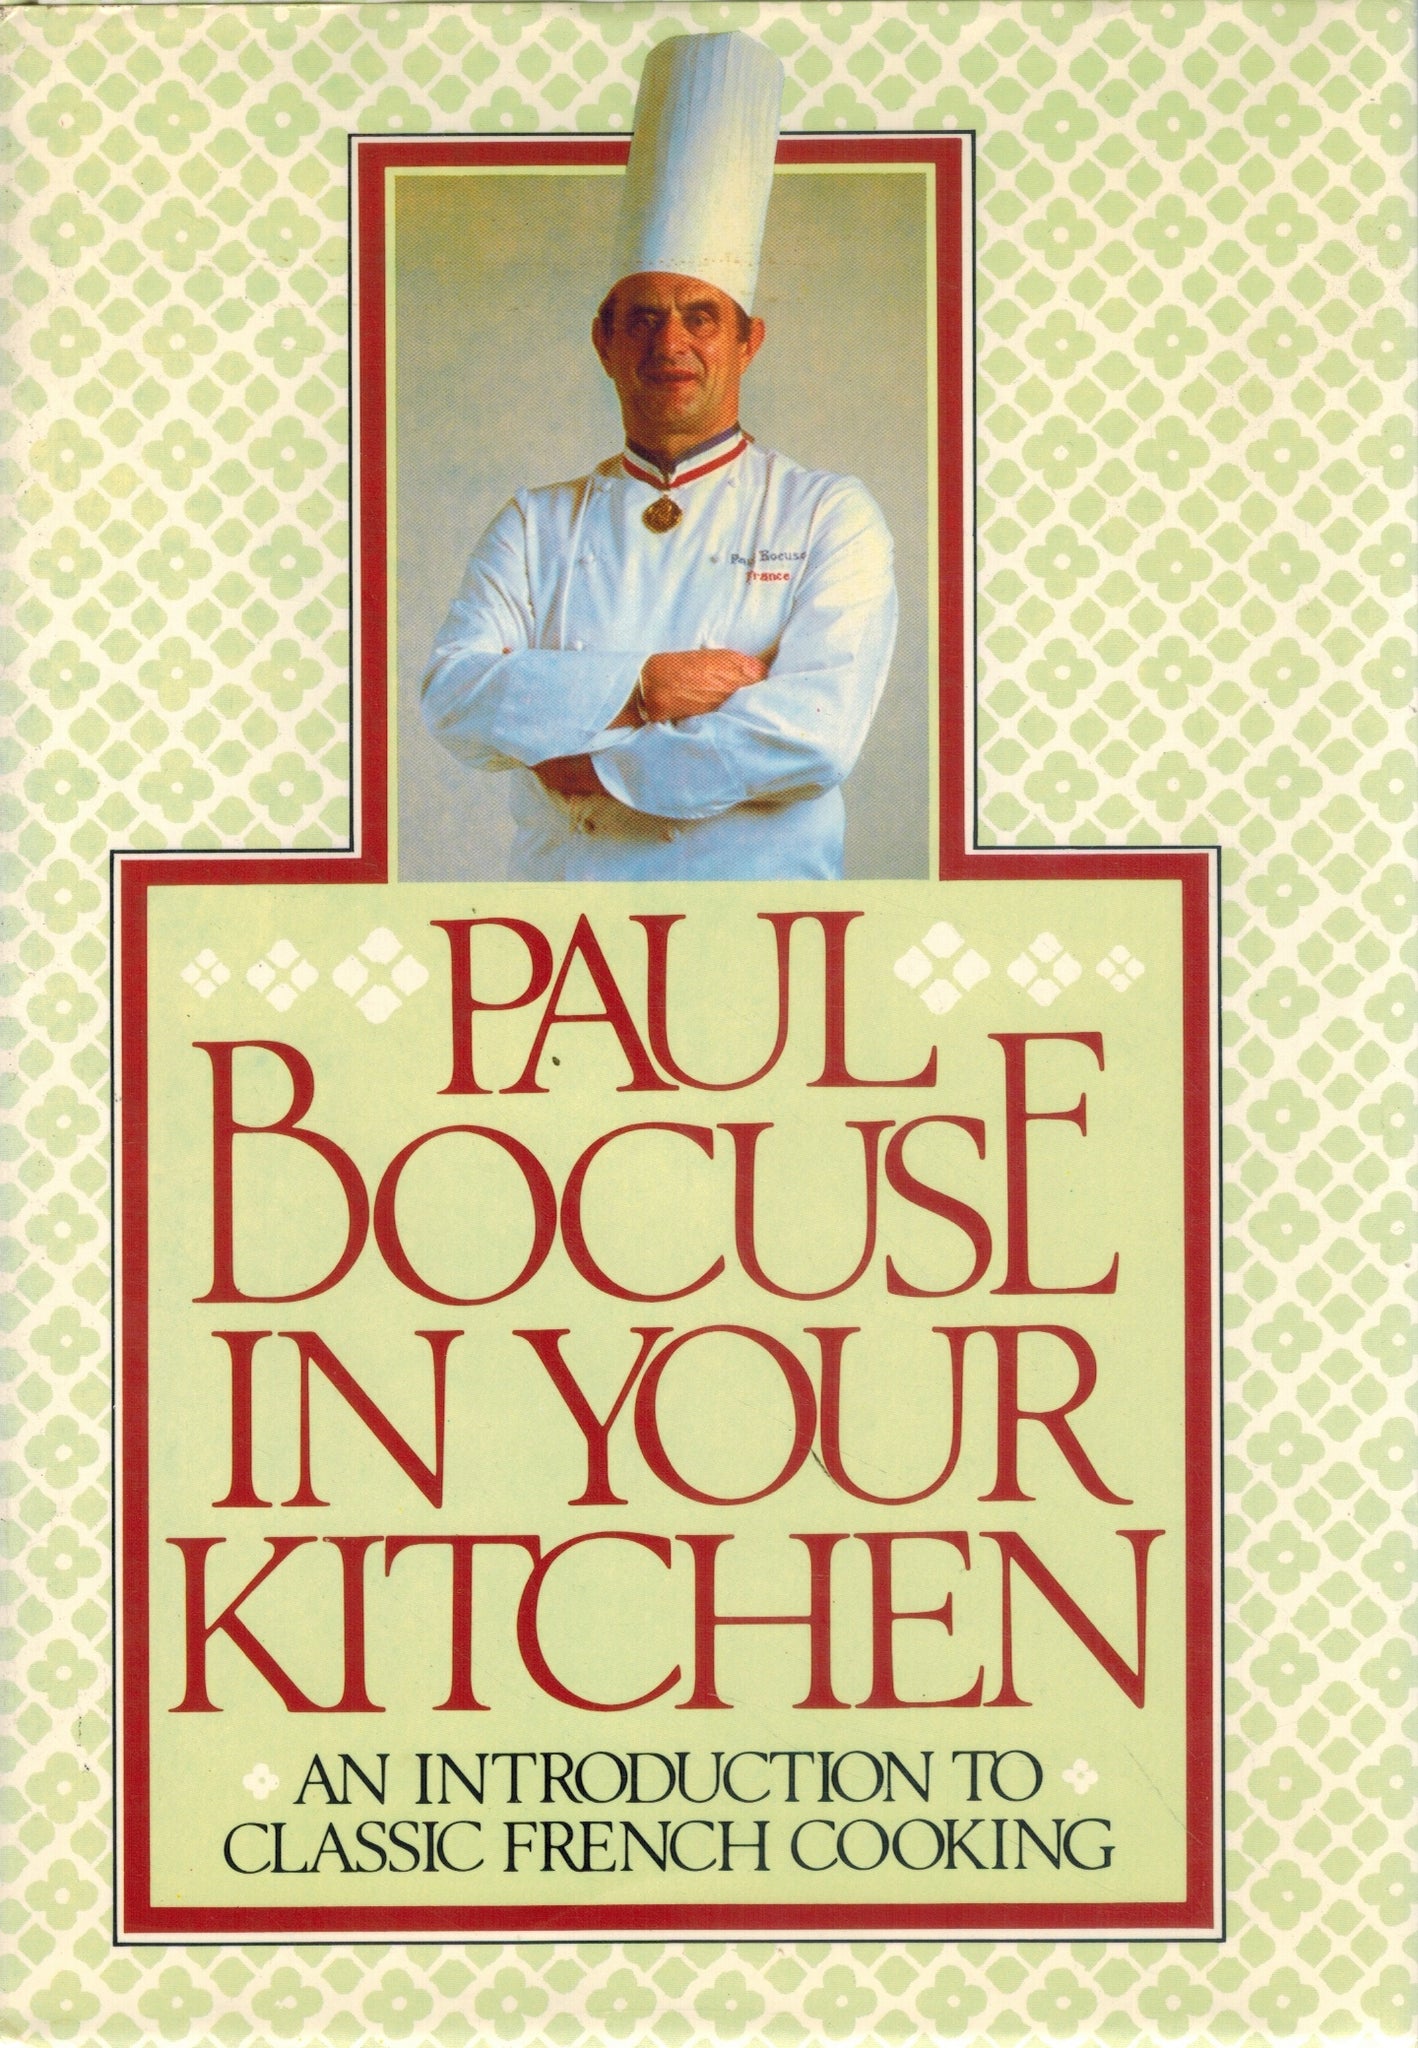 PAUL BOCUSE IN YOUR KITCHEN